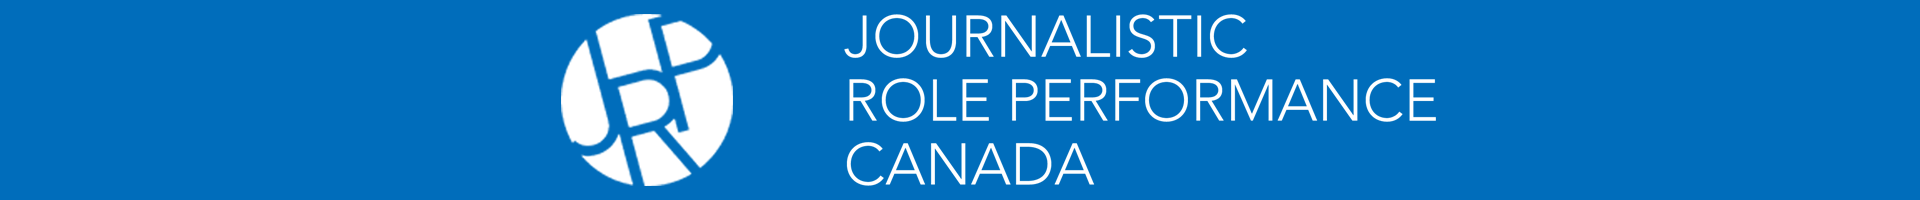 Journalistic Role Performance Canada